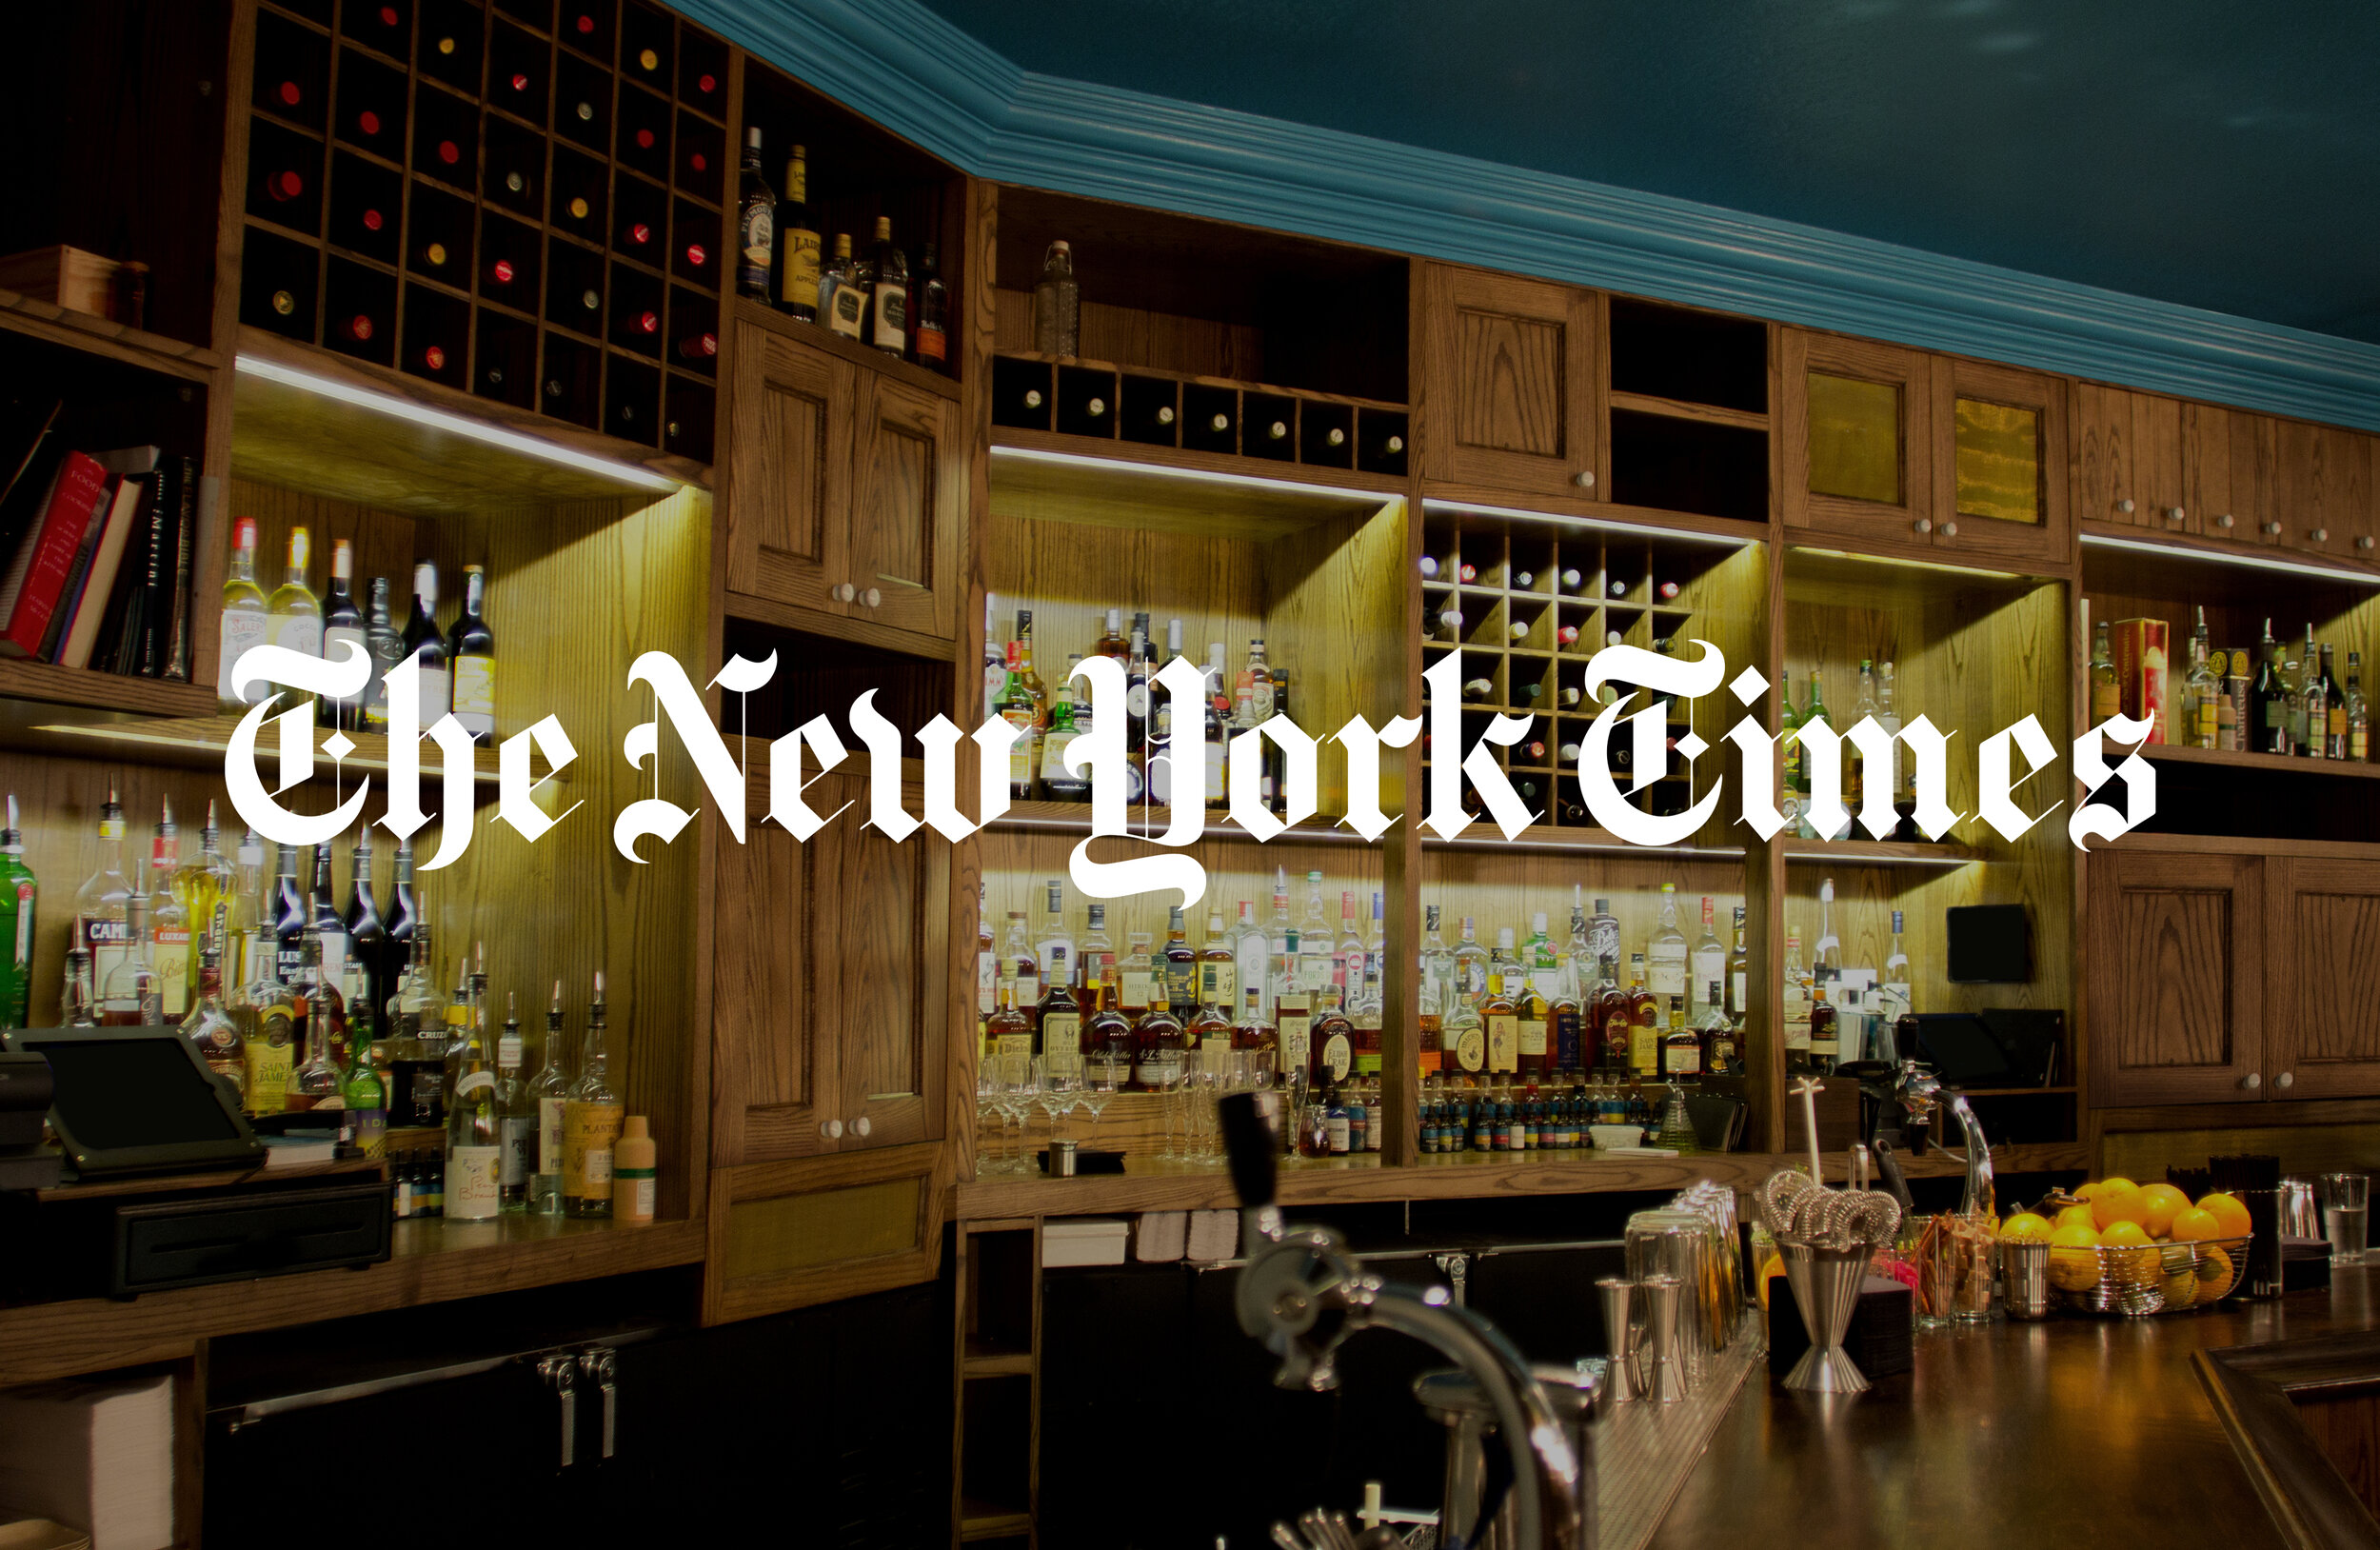 New York Times: Pouring Ribbons